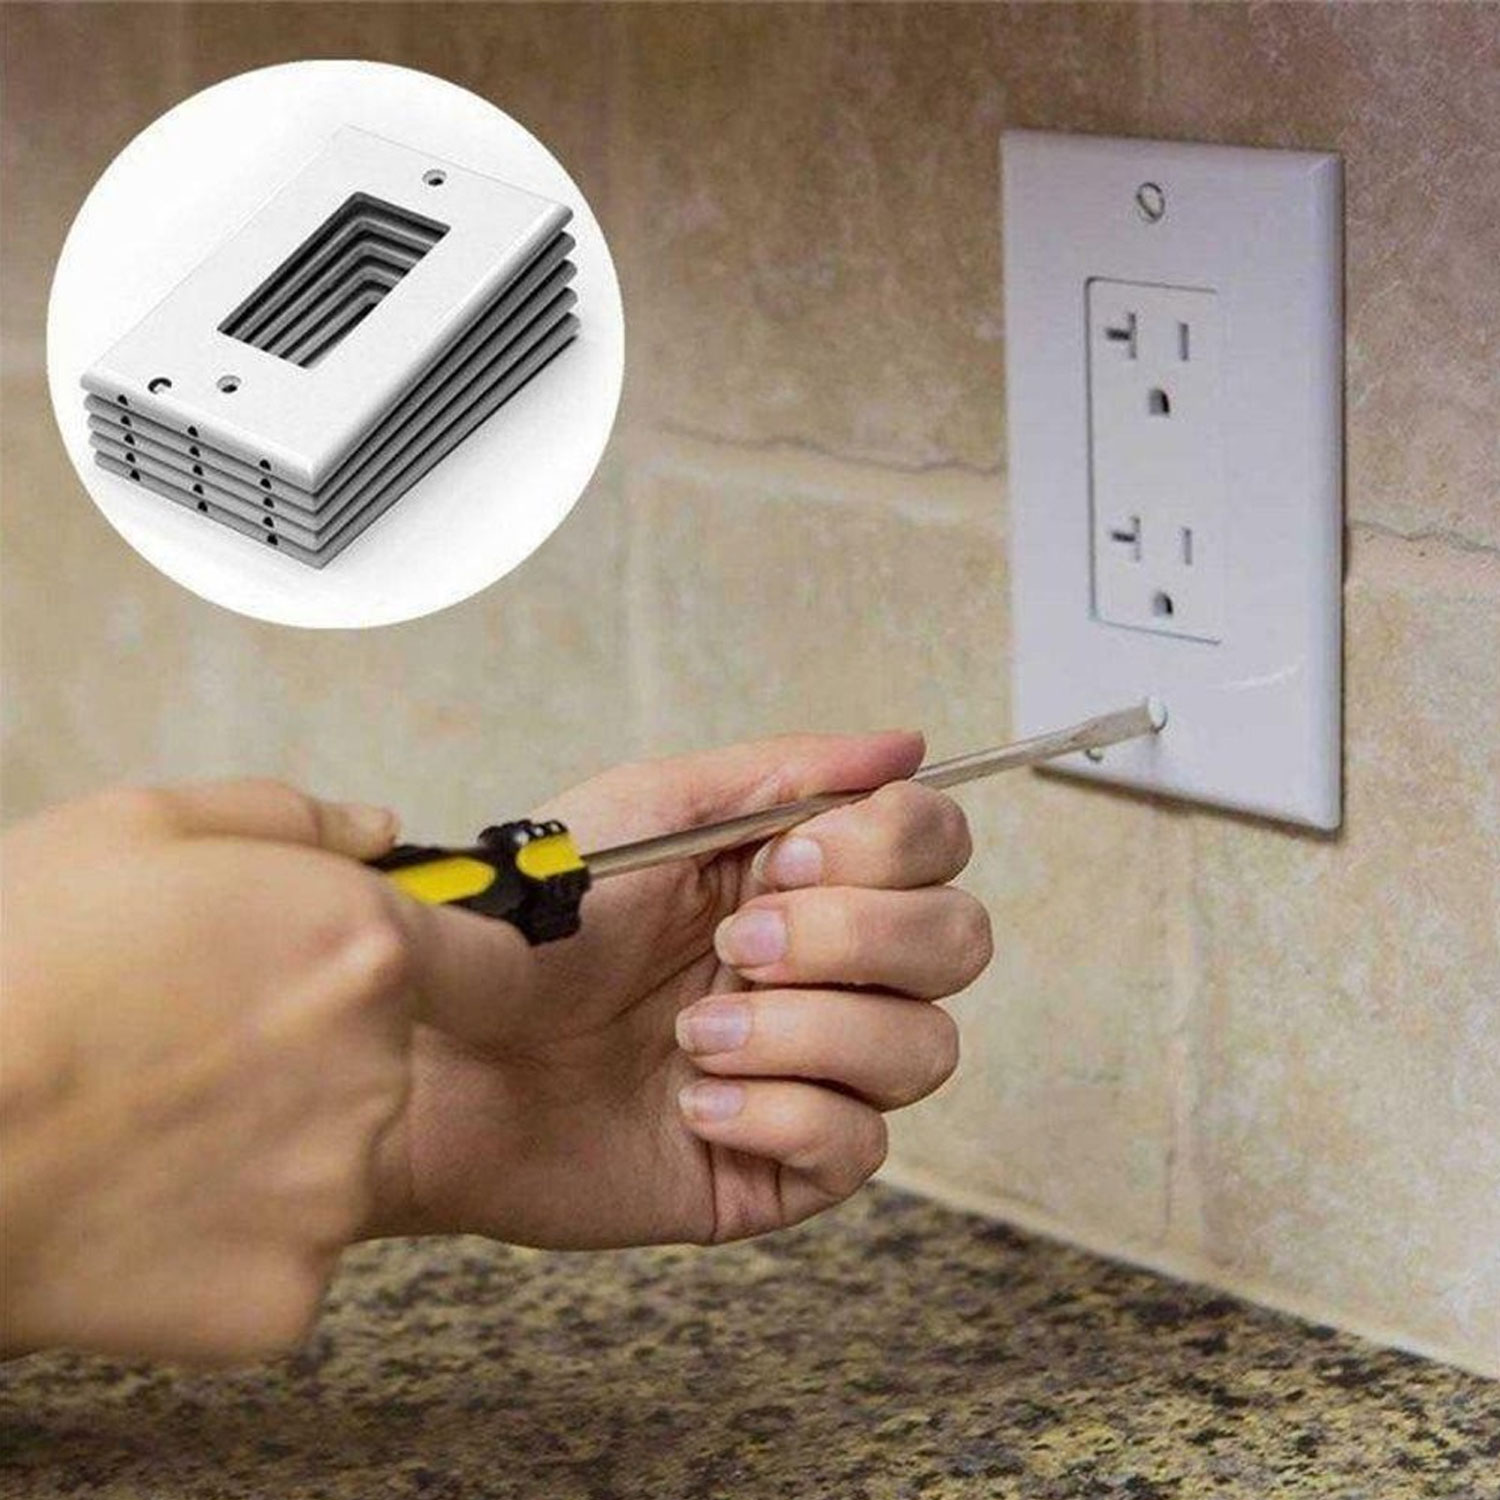 5 Pack Outlet Cover With Built In LED Night Lights